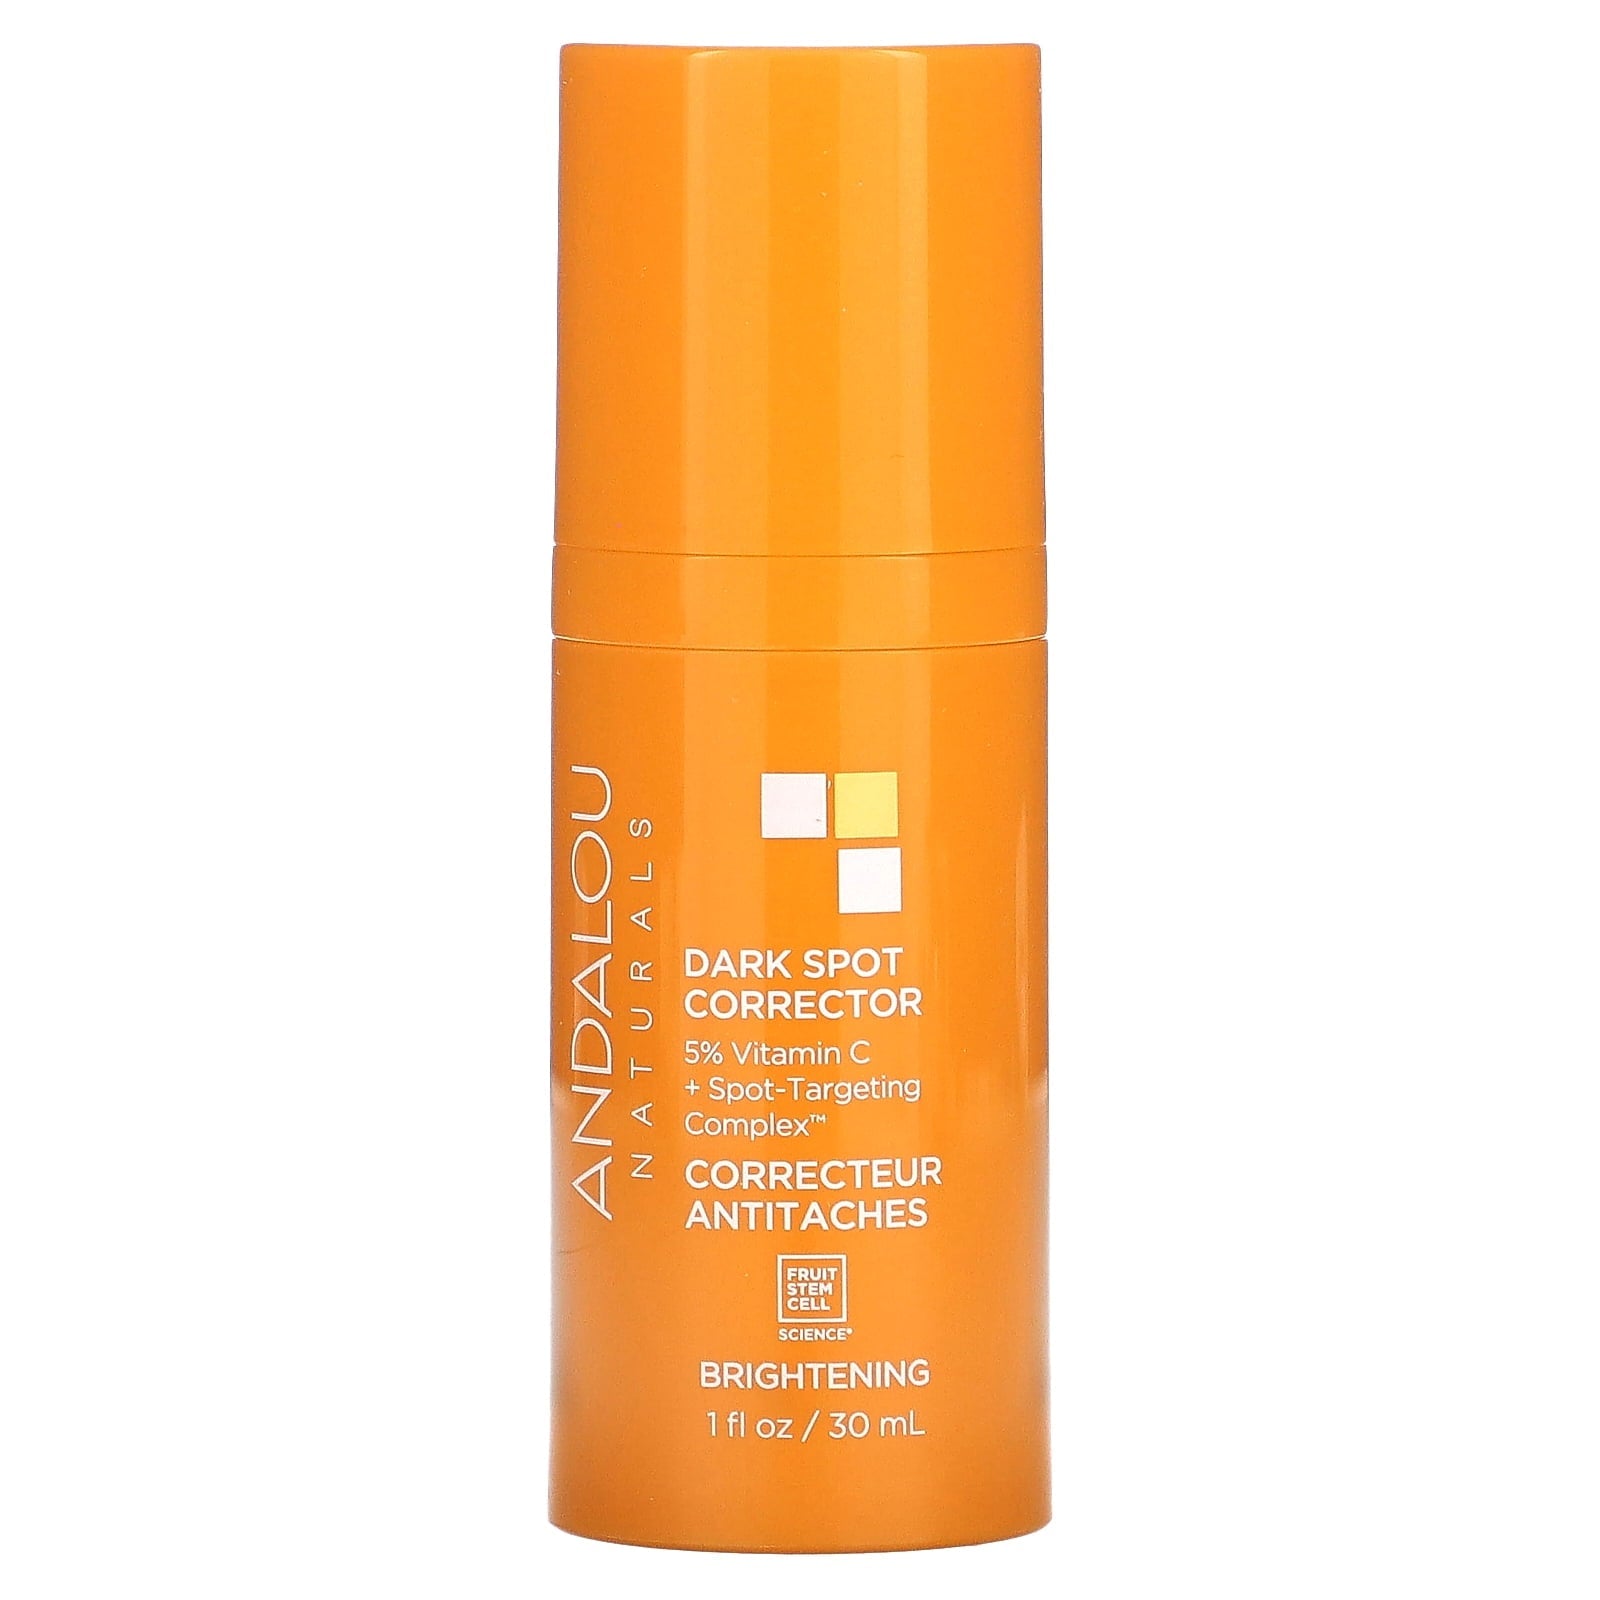 Andalou Naturals Dark Spot Corrector, Brightening Face Serum with Vitamin C, Hyperpigmentation Treatment to Even Skin Tone & Reduce Appearance of Acne Scars, Age Spots & UV Damage, 1 oz Bottle